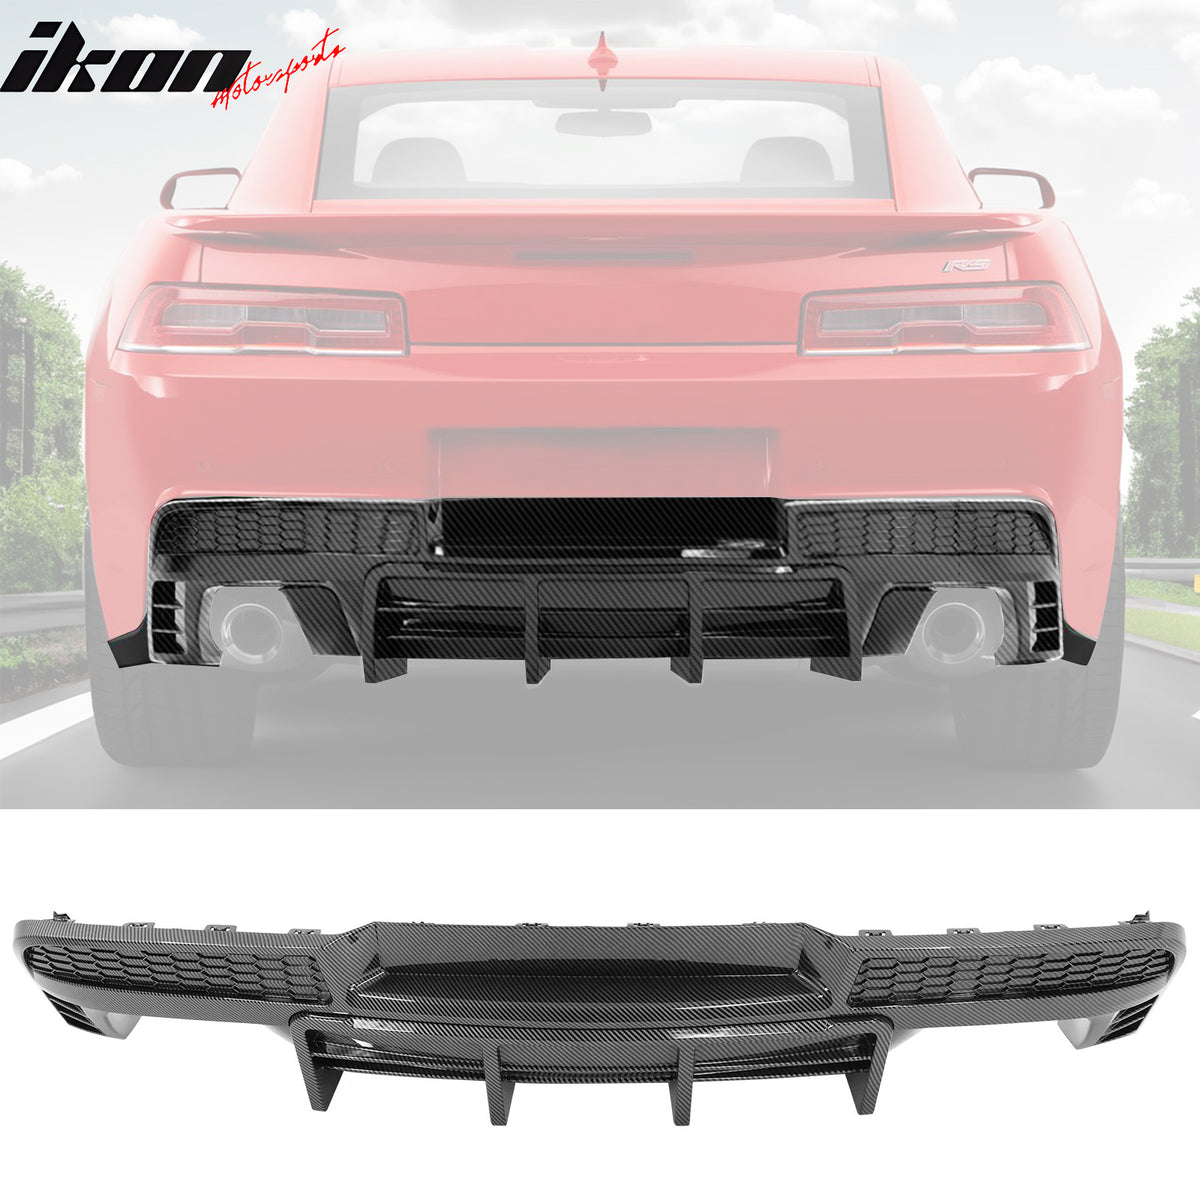 IKON MOTORSPORTS, Rear Diffuser Compatible With 2014-2015 Chevrolet Camaro, Ikon Style PP Lower Valance Spoiler Lip With Fin